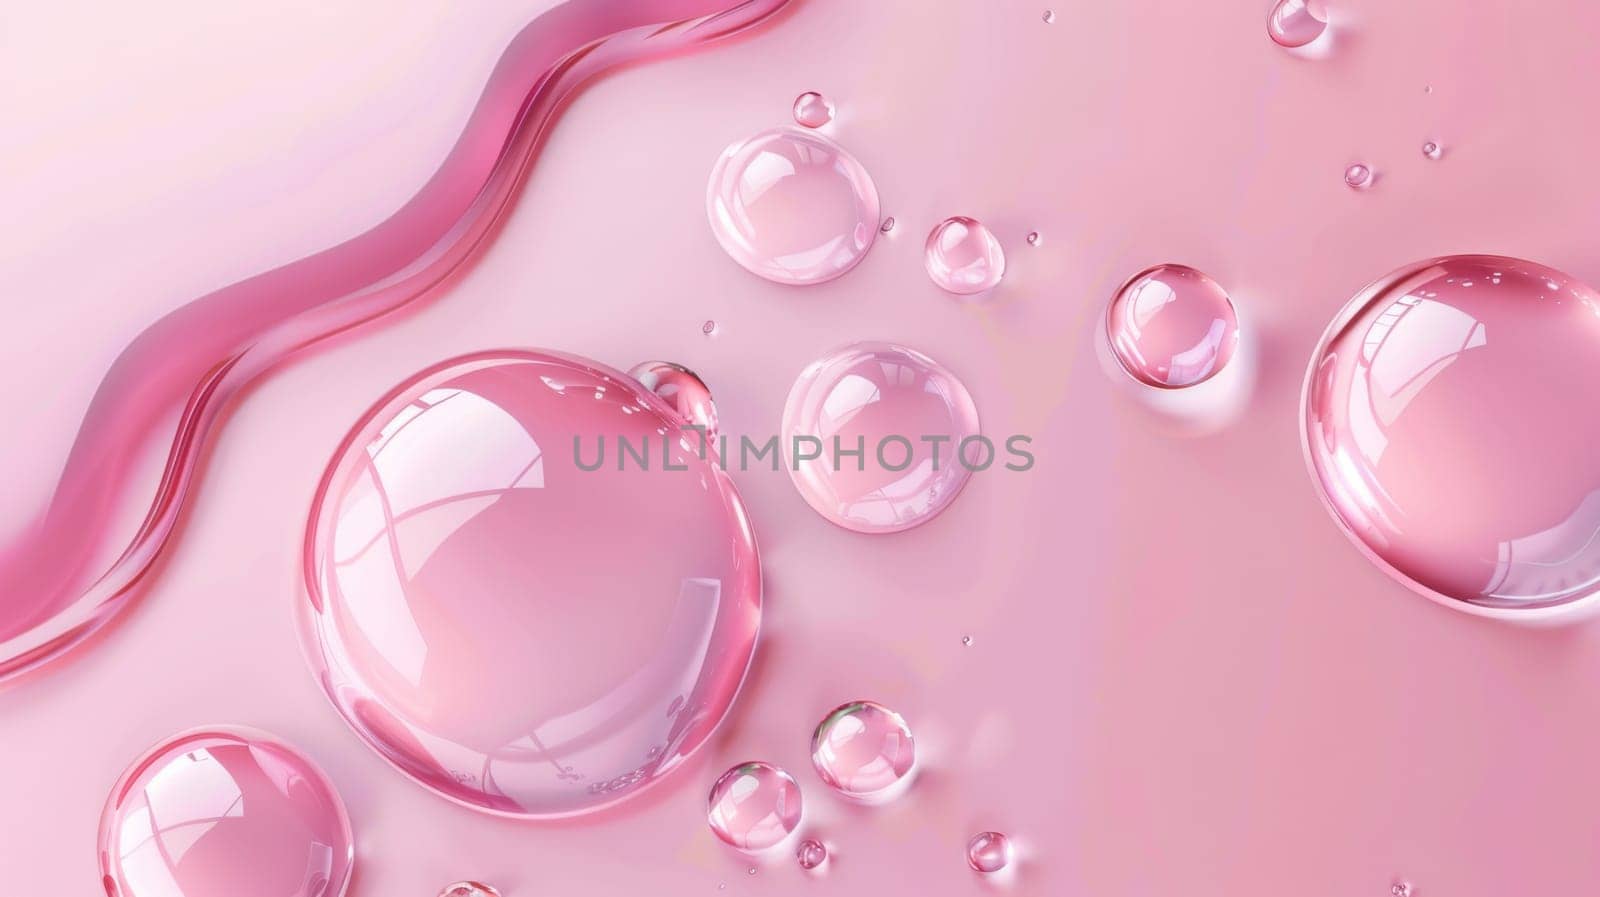 Illustration of realistic serum drops on pink surface with gel, oil, collagen, jelly, water texture and glossy surface. Cosmetic beauty care product with hyaluronic acid.